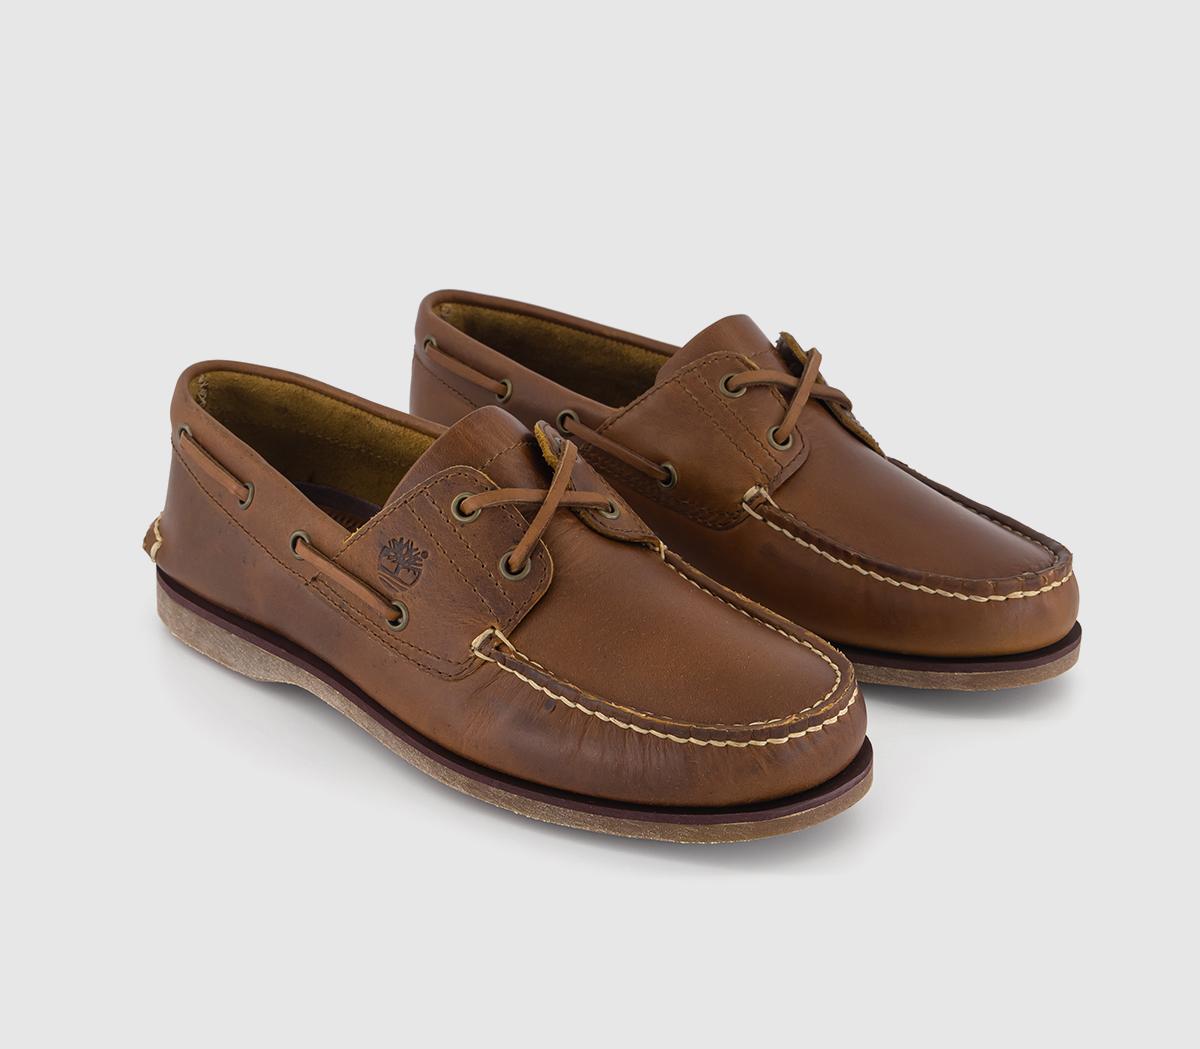 Timberland New Boat Shoes Md Brown Full Grain - Men's Casual Shoes